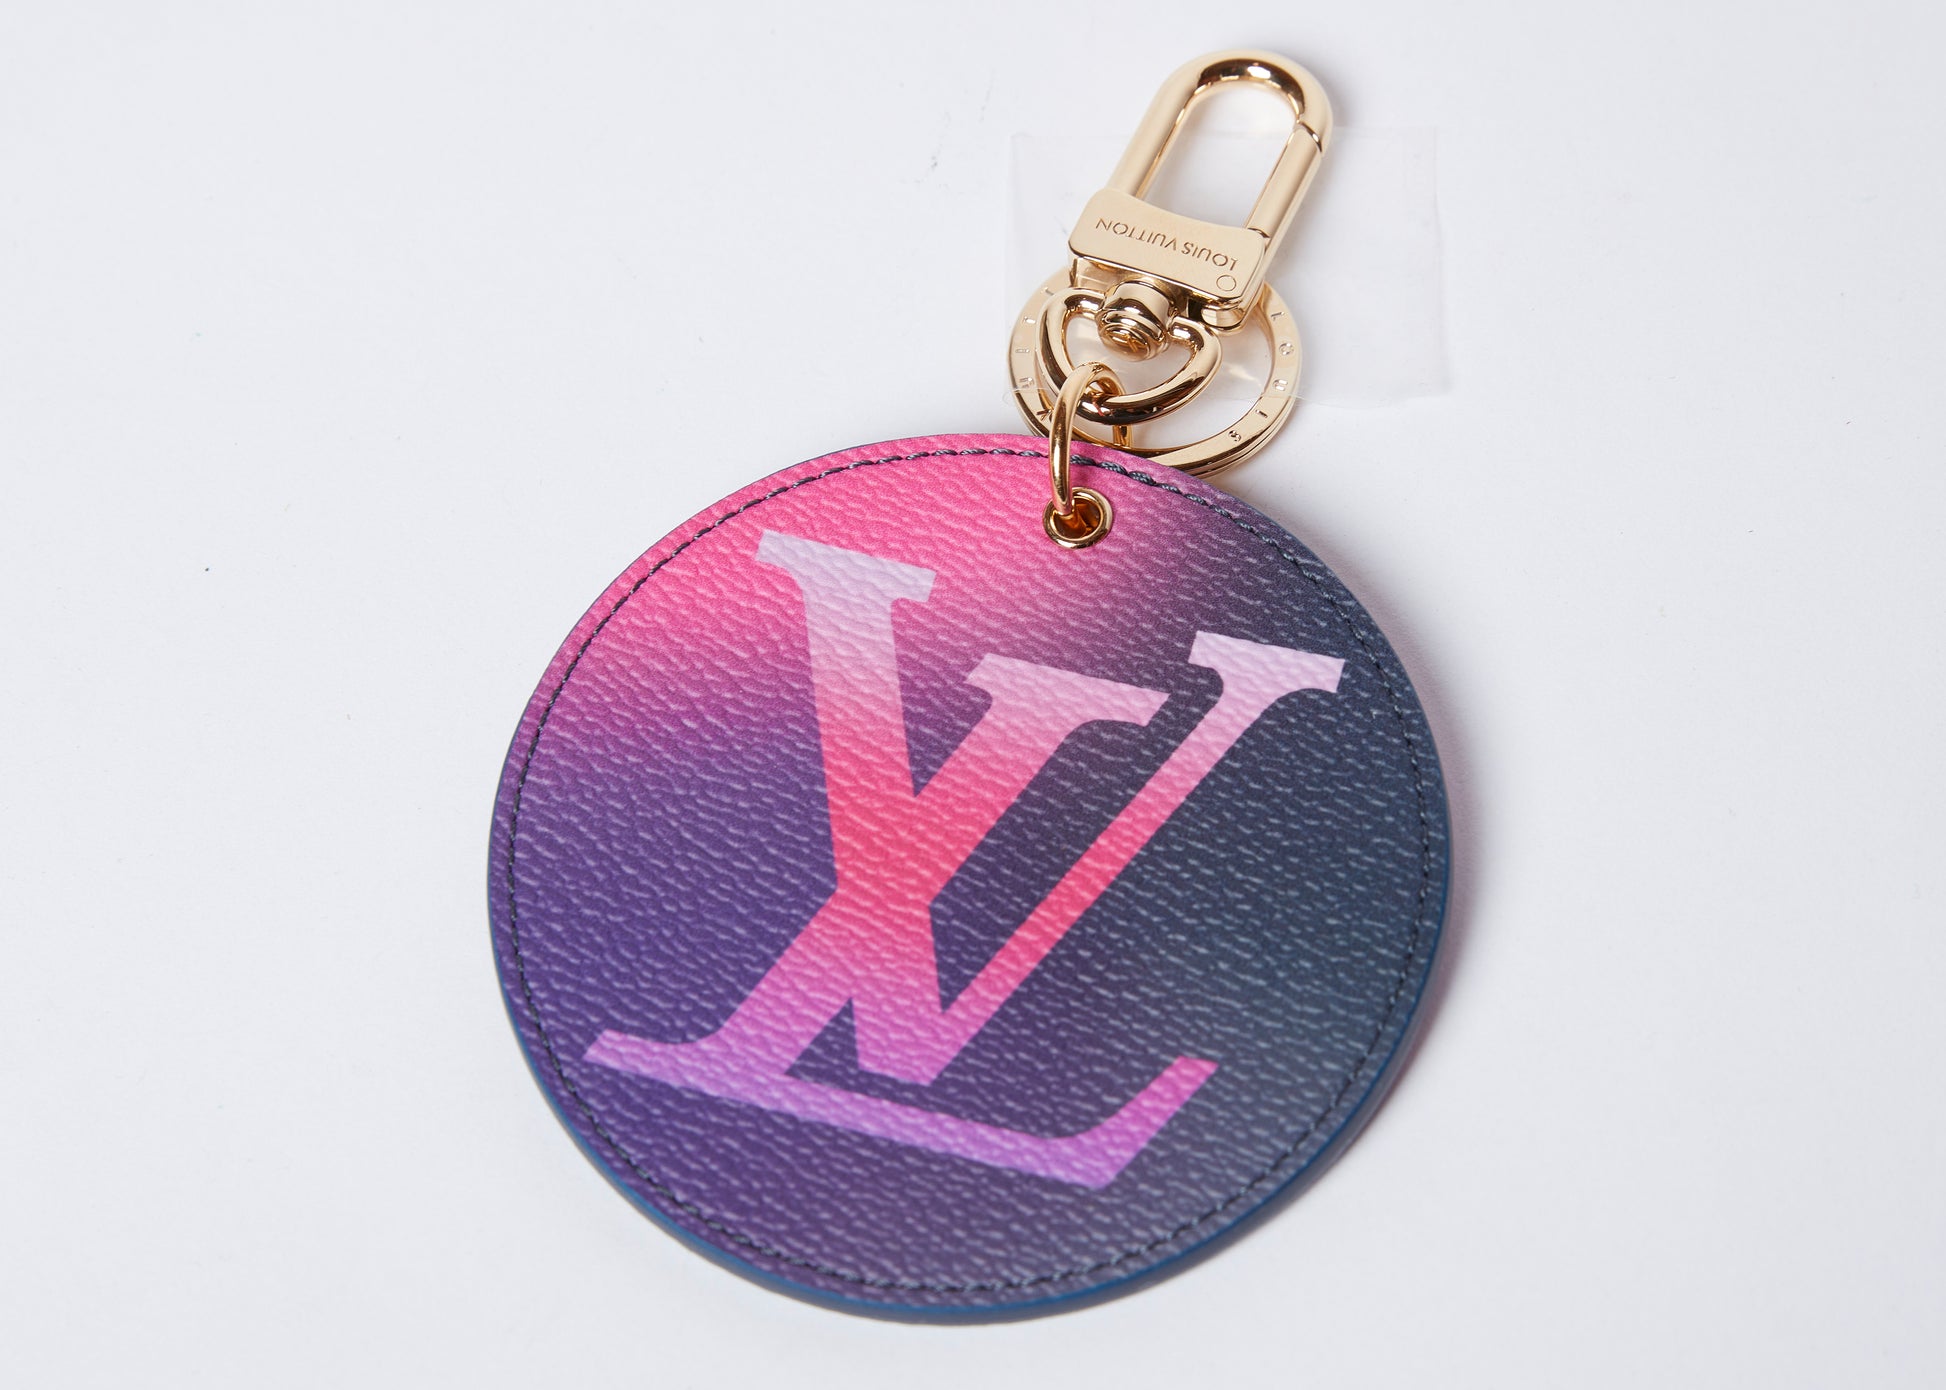 Louis Vuitton ILLUSTRE Resort Key Ring and Bag Charm Pink Canvas